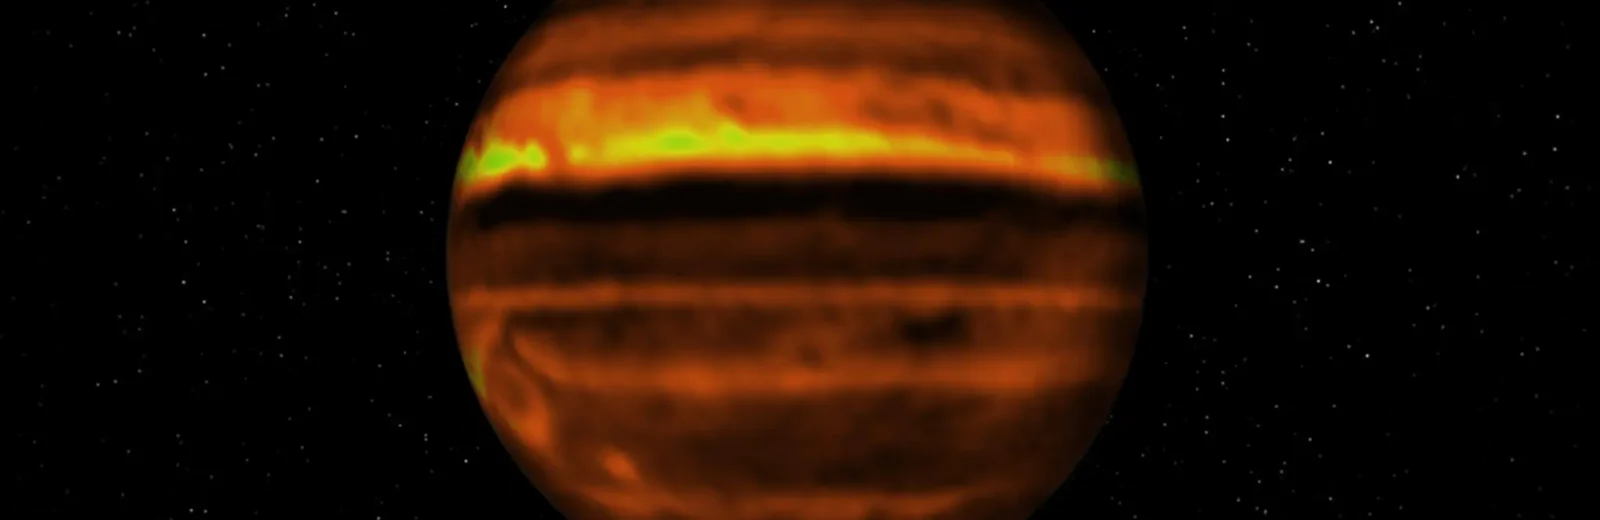 What goes on beneath Jupiter’s clouds?